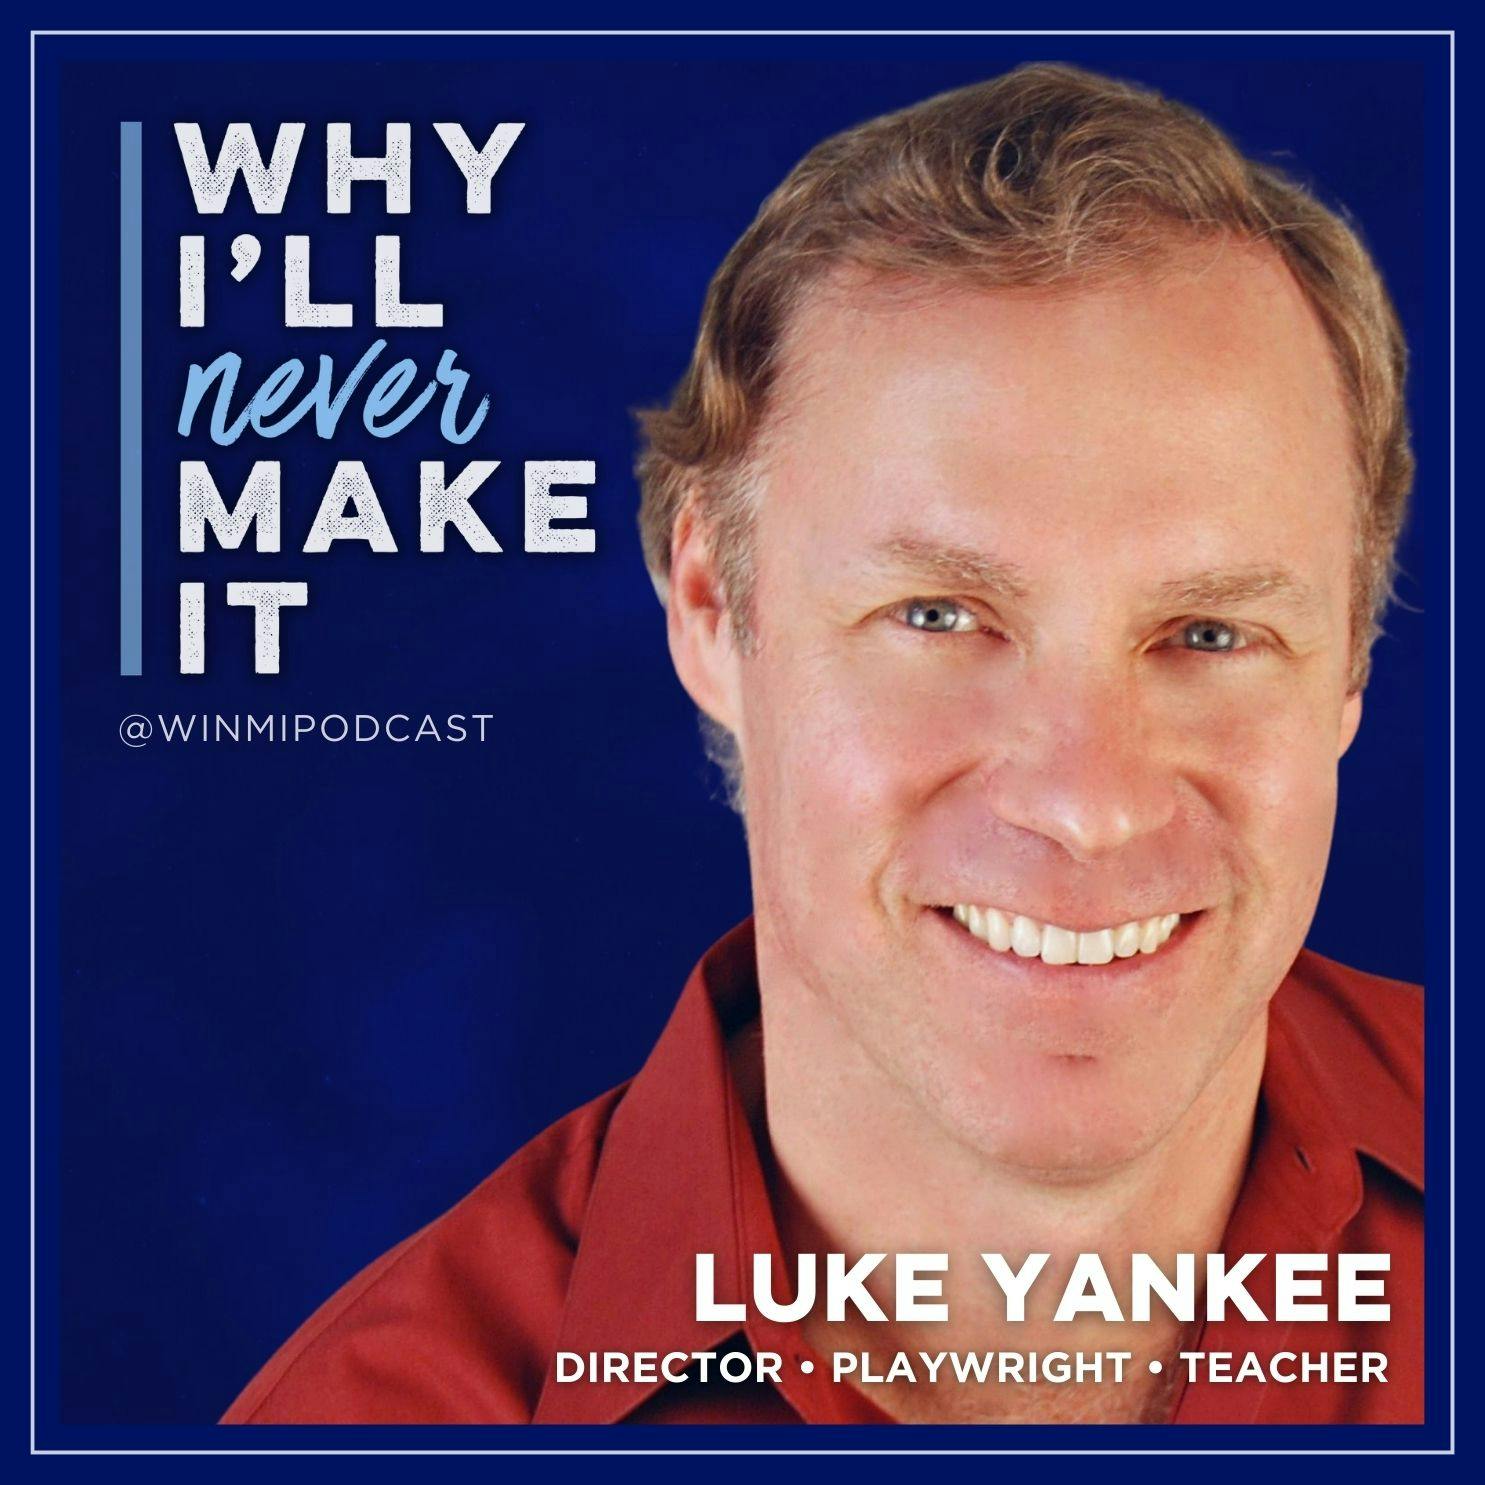 Luke Yankee Highlights the Mishaps and Misadventures We All Endure as Actors